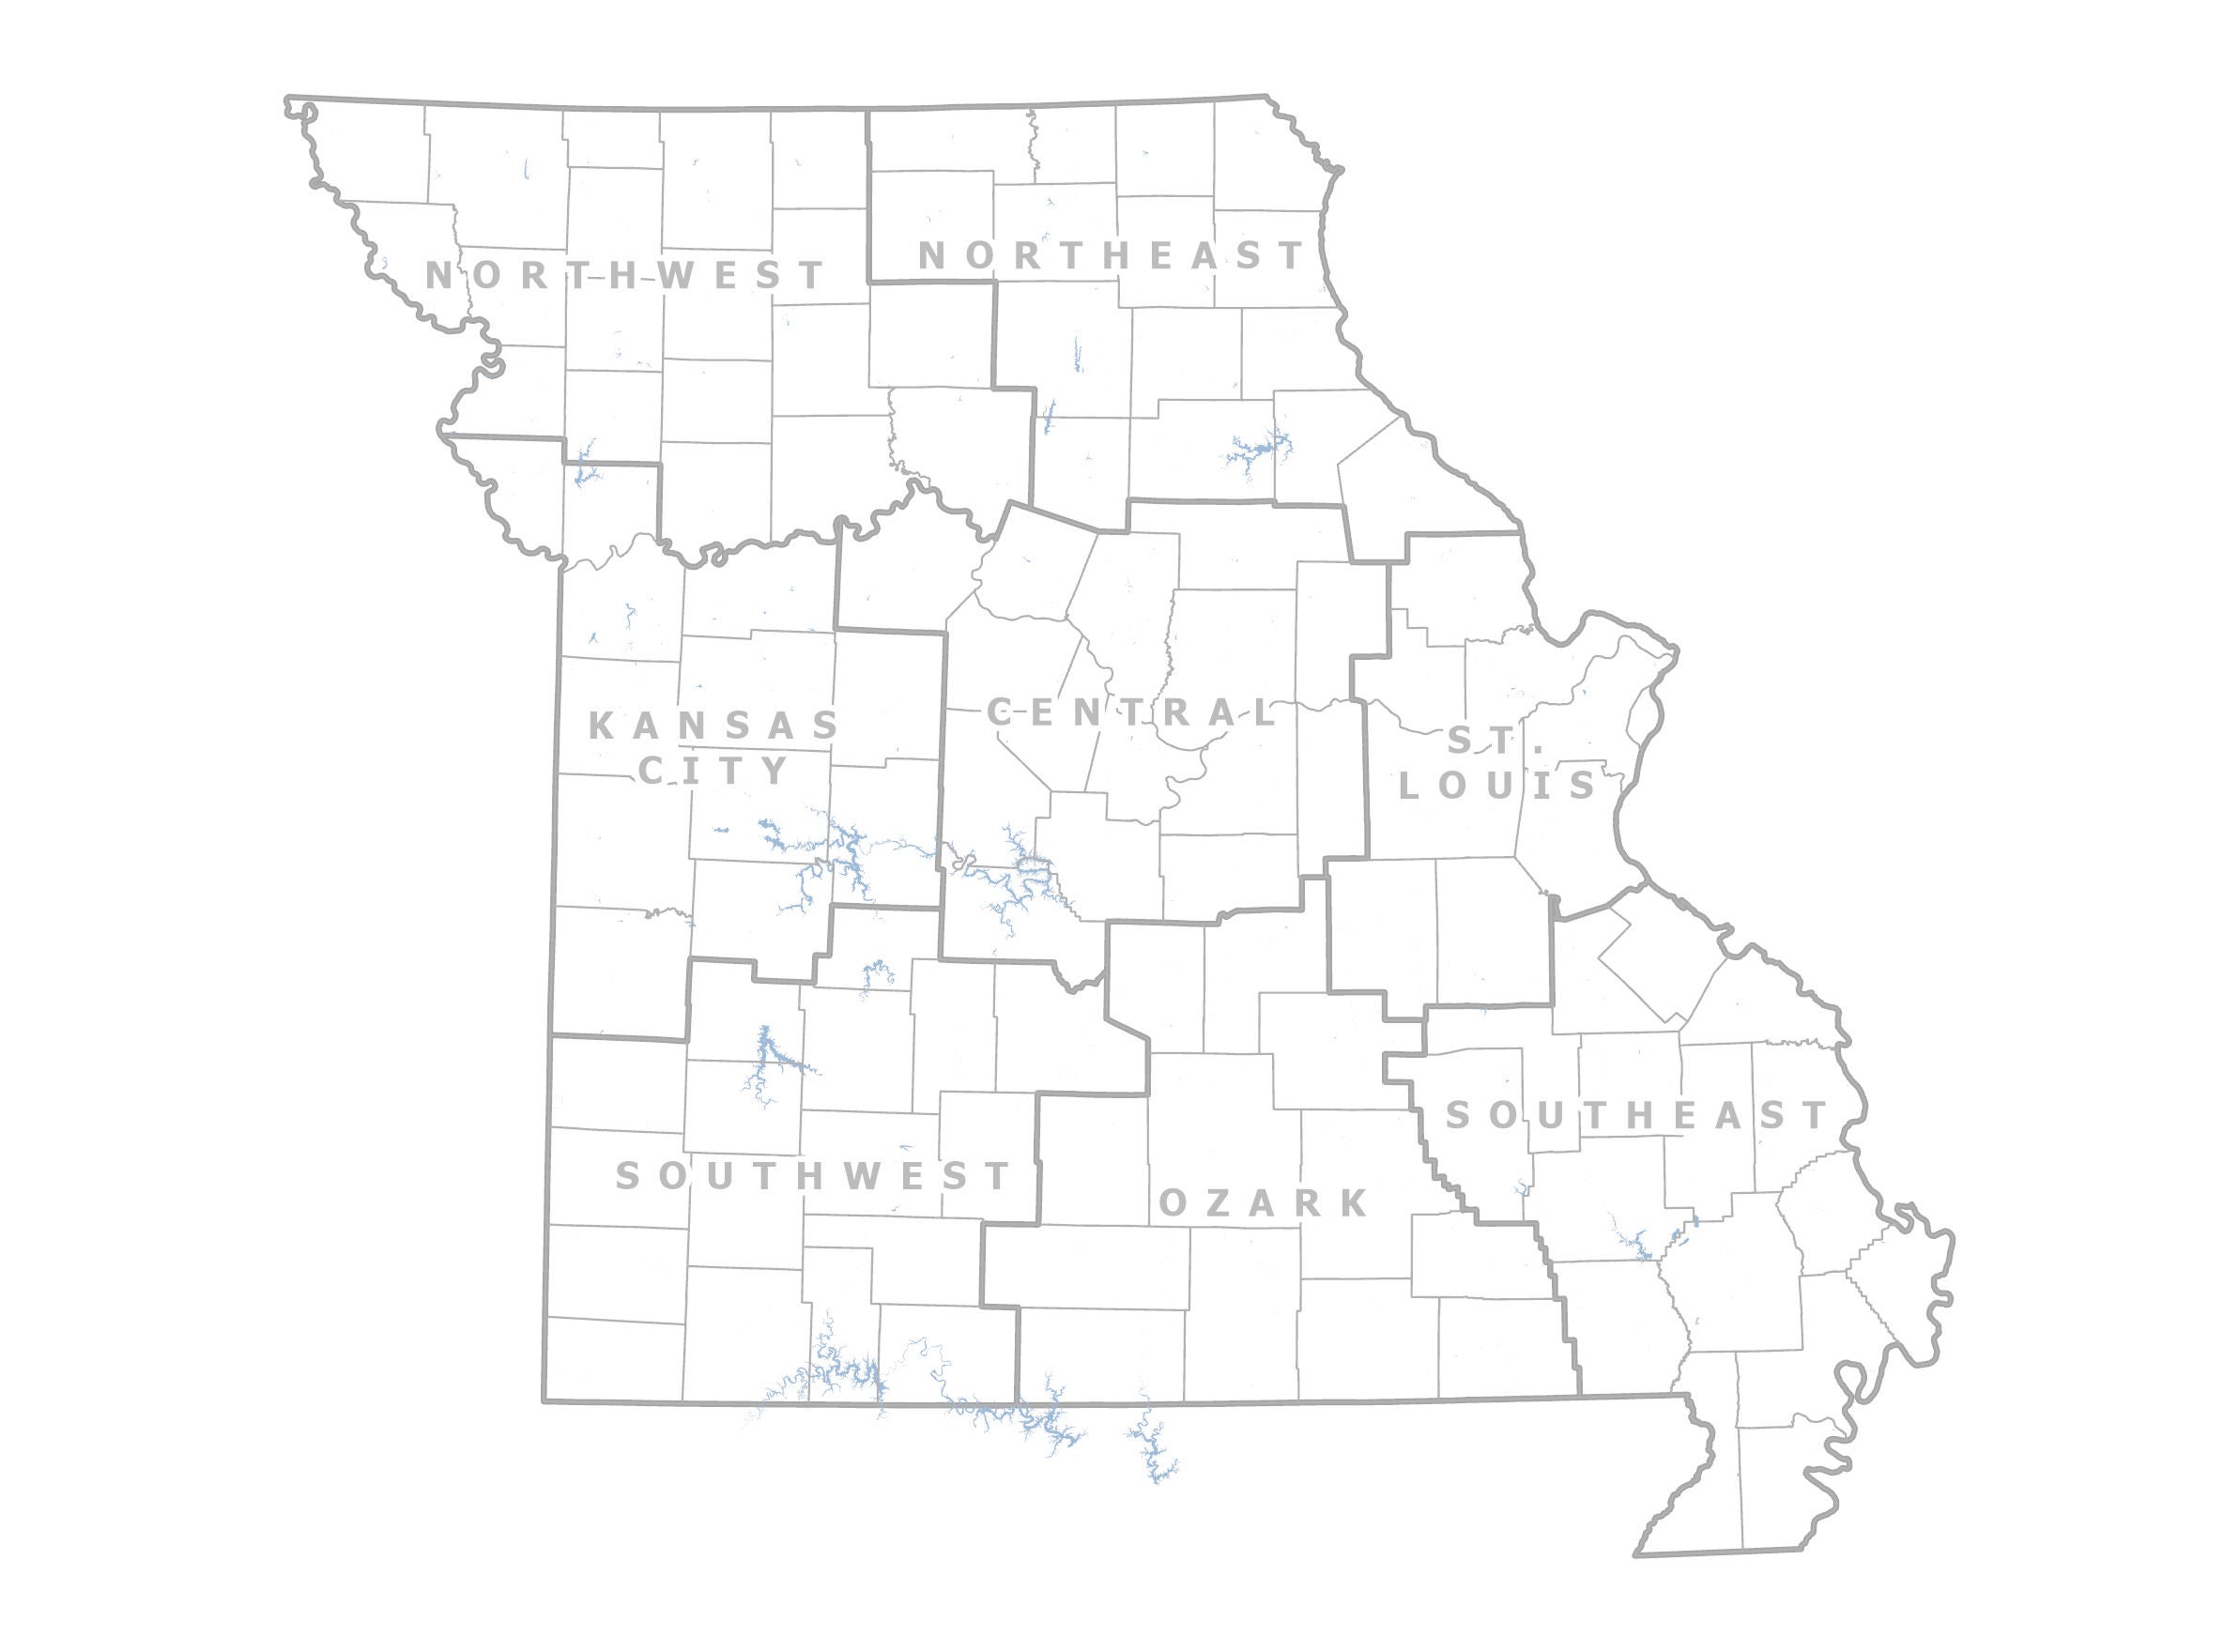 Map outlining the 8 different MDC regions in Missouri.